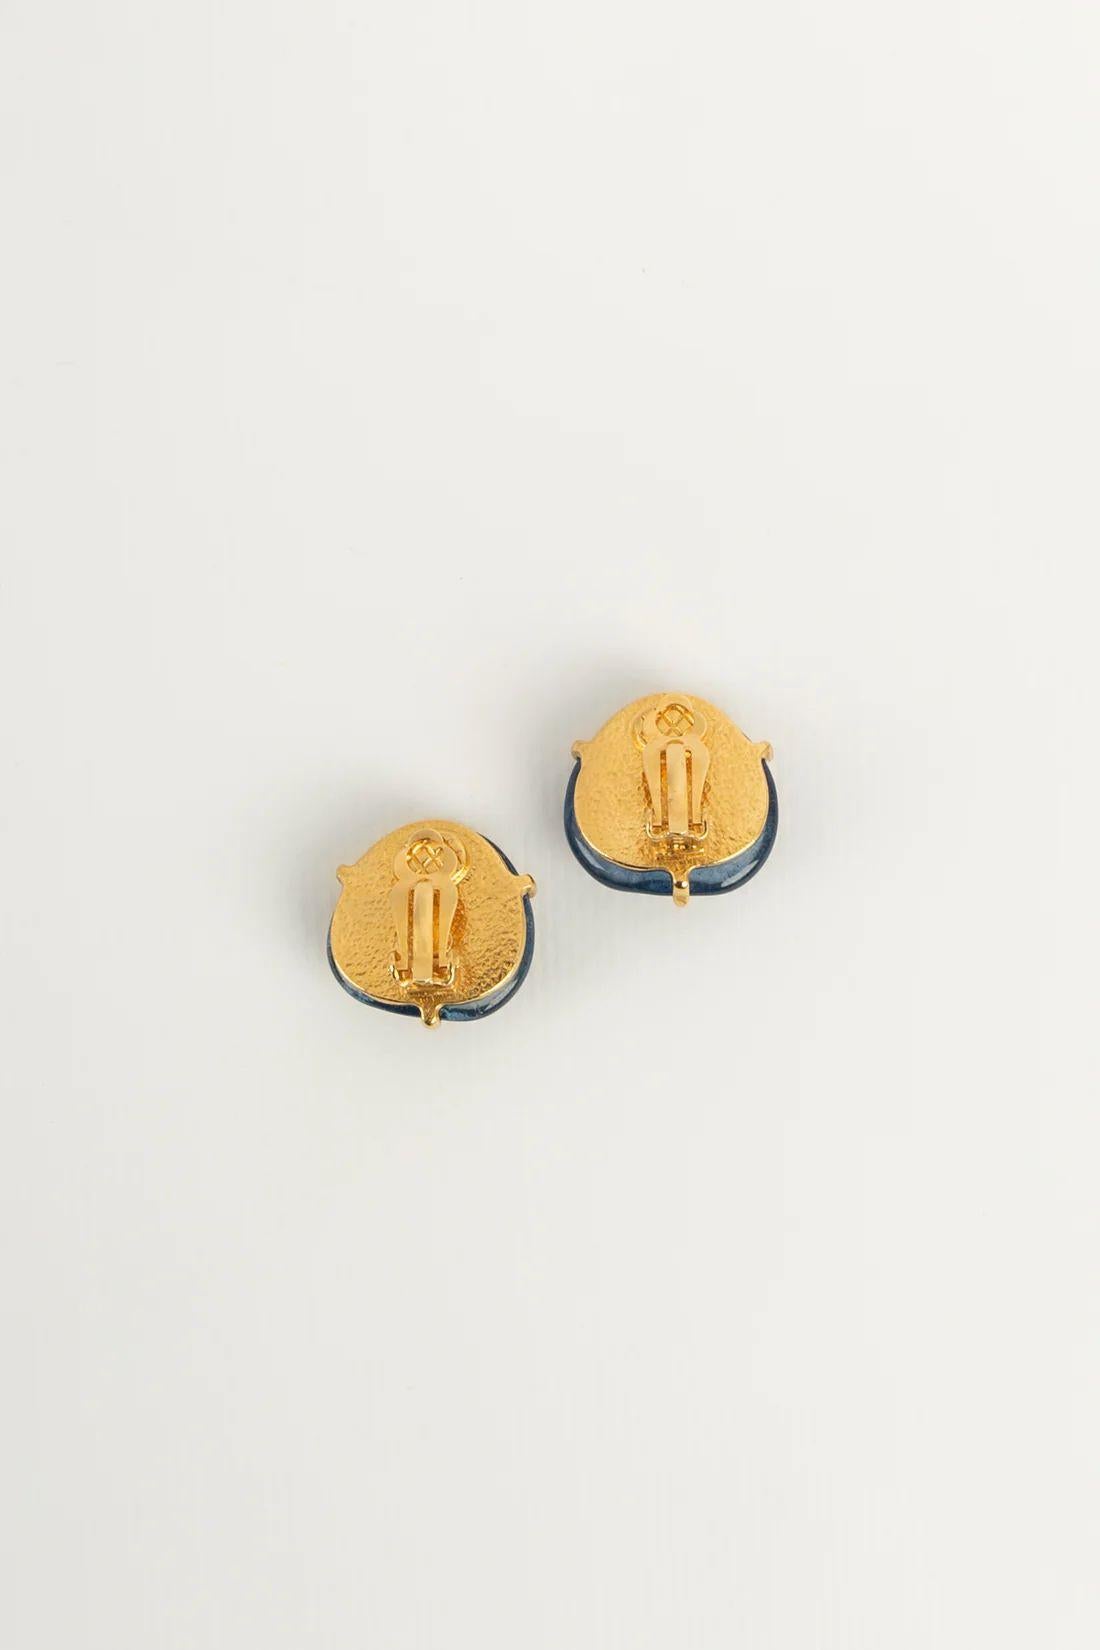 Women's Chanel Earrings Clips in Gilded Metal and Cabochons in Blue Glass Paste